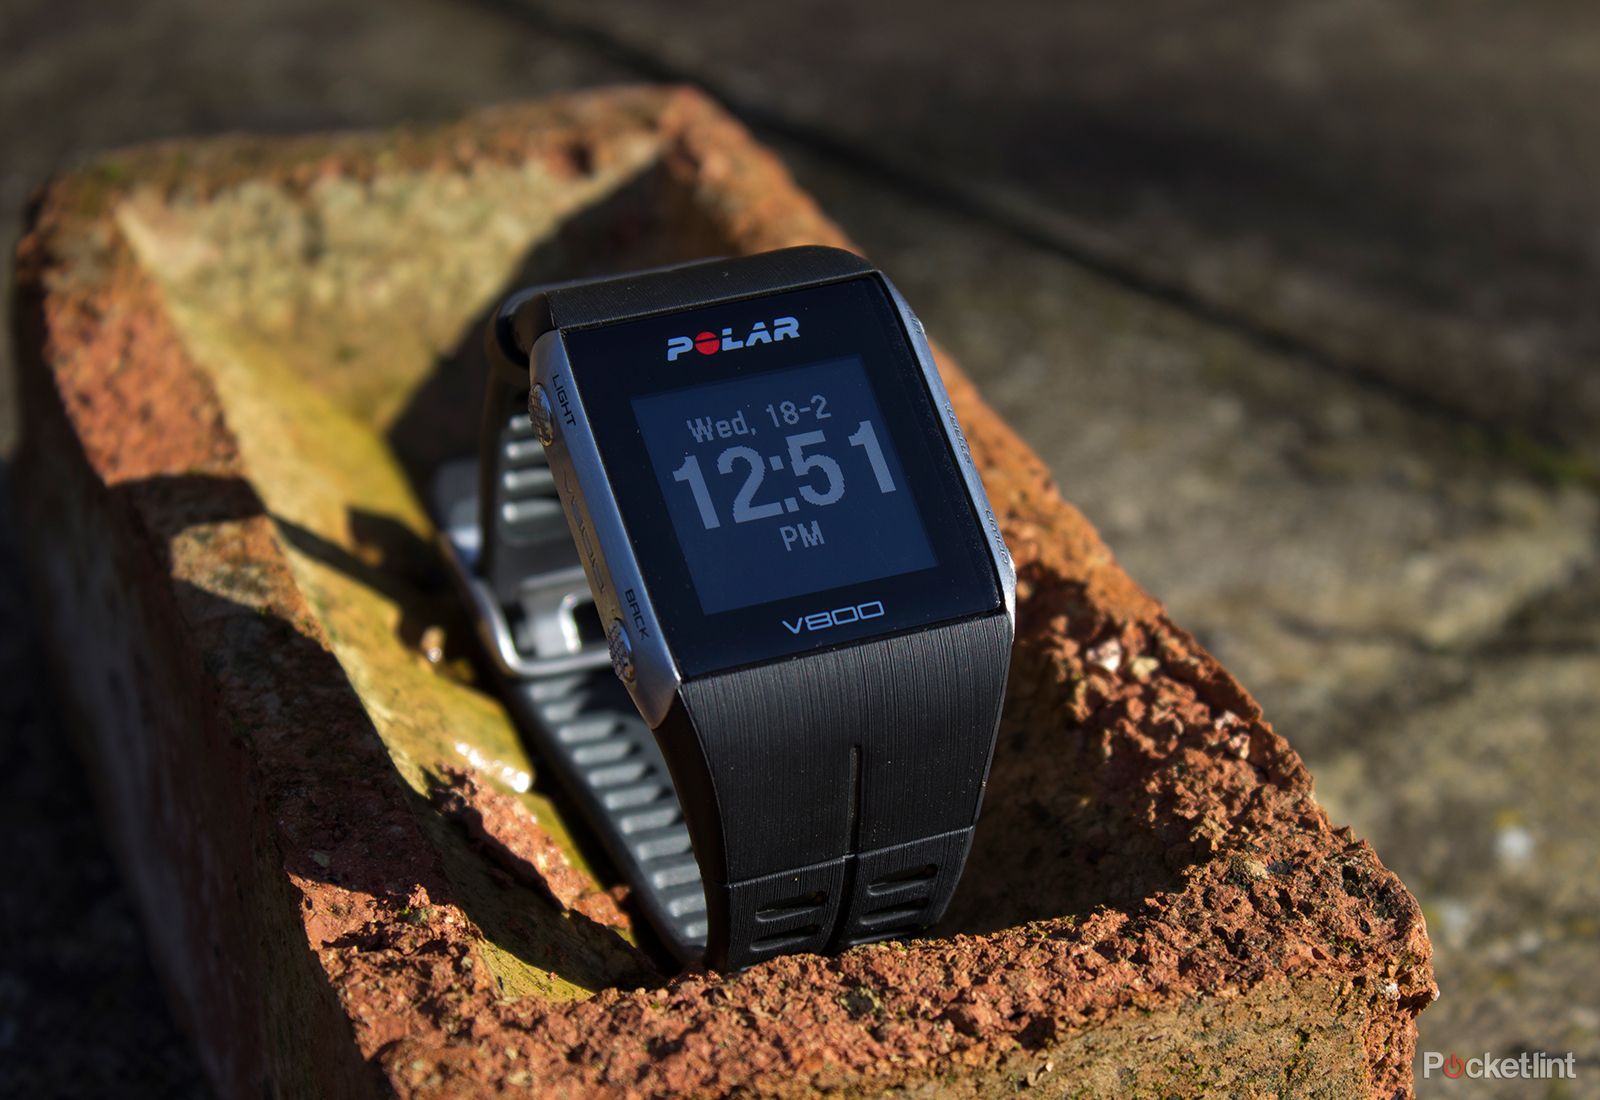 polar made an affordable wrist wearable with an ohr sensor coming soon image 1